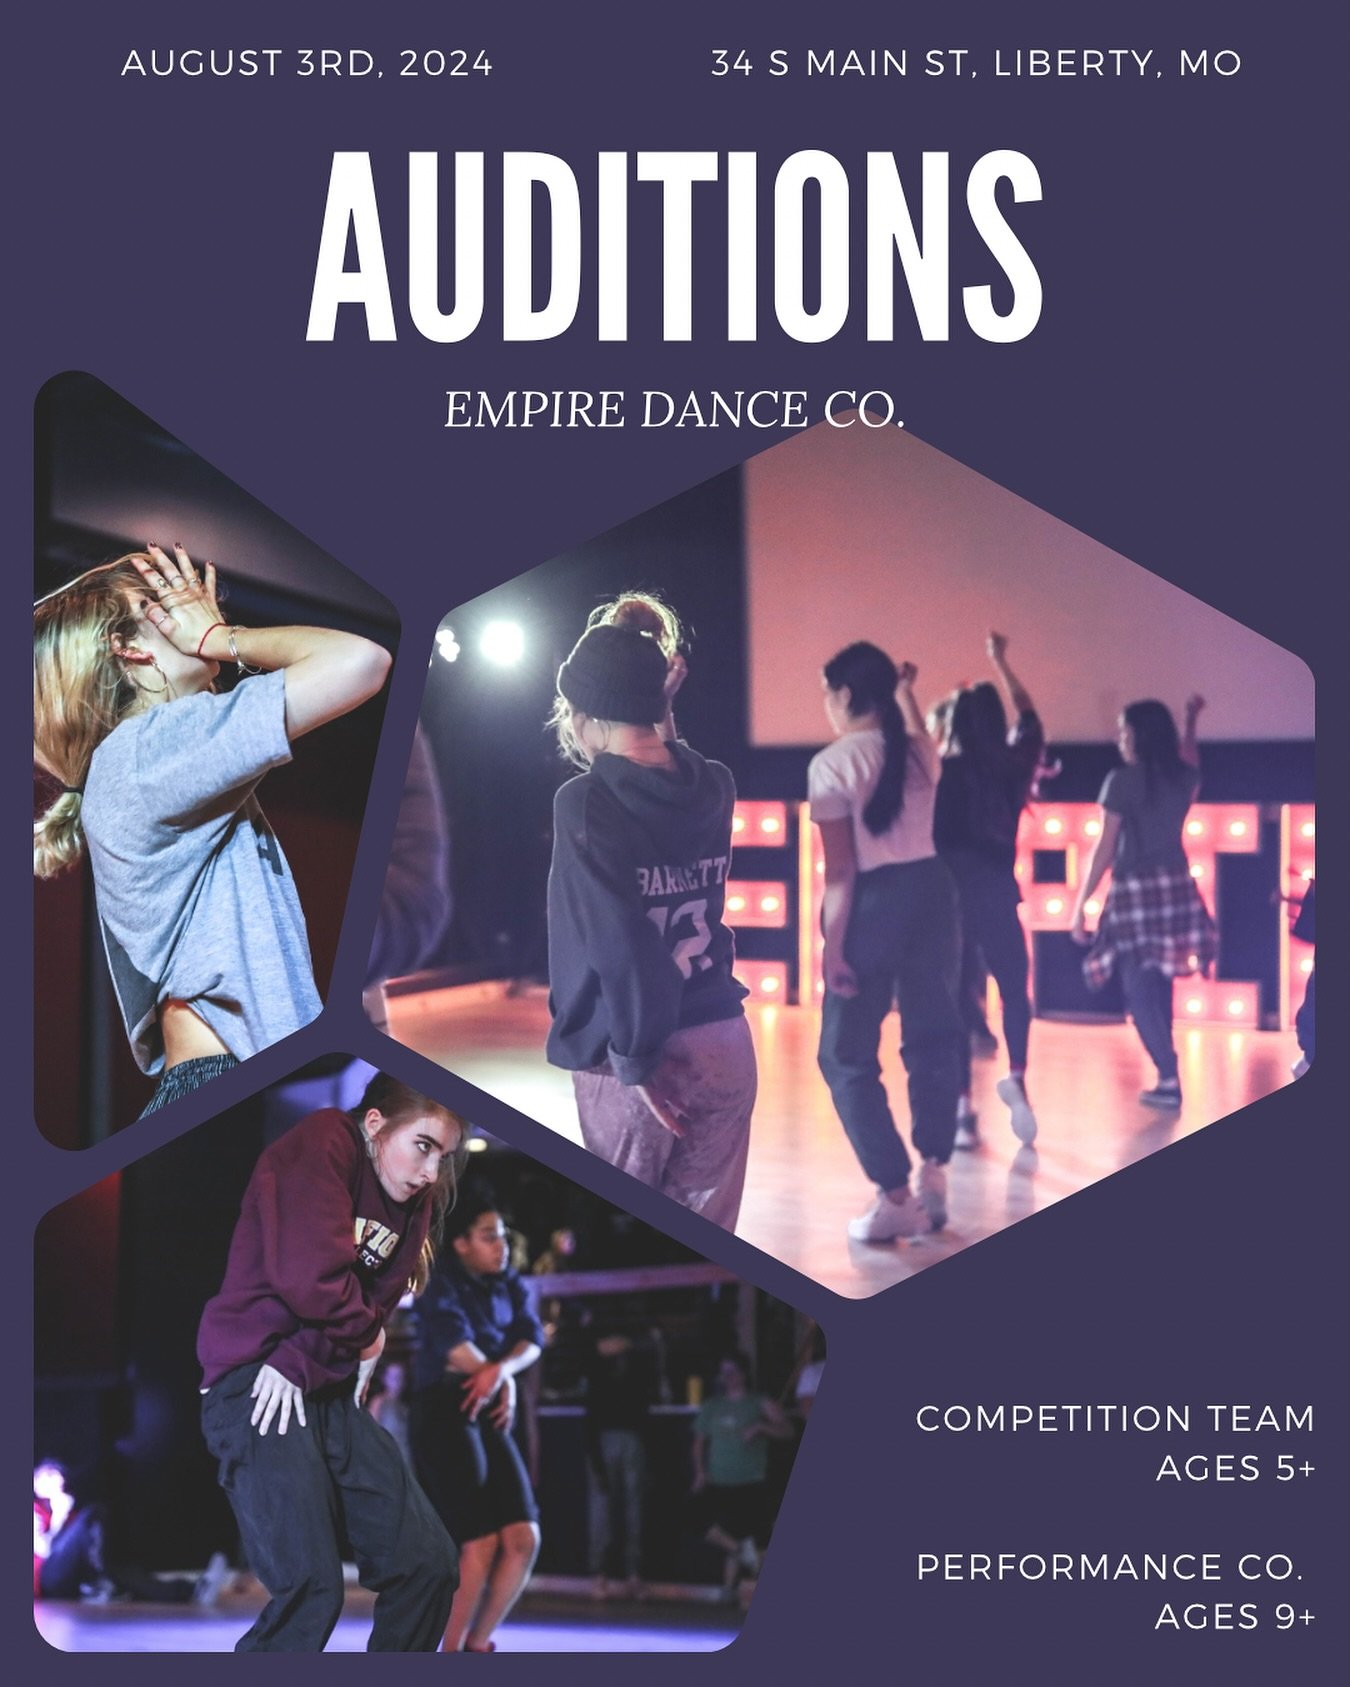 HUGE ANNOUNCEMENT 📣 SAVE THE DATE and register to audition for The Empire Dance Co. today!!

The 2024-2025 Empire Dance Co. auditions will be held on August 3rd, 2024 at the following times:

Competition Team (3+ Hours Per Week, Rehearsals, 2-3 Loca